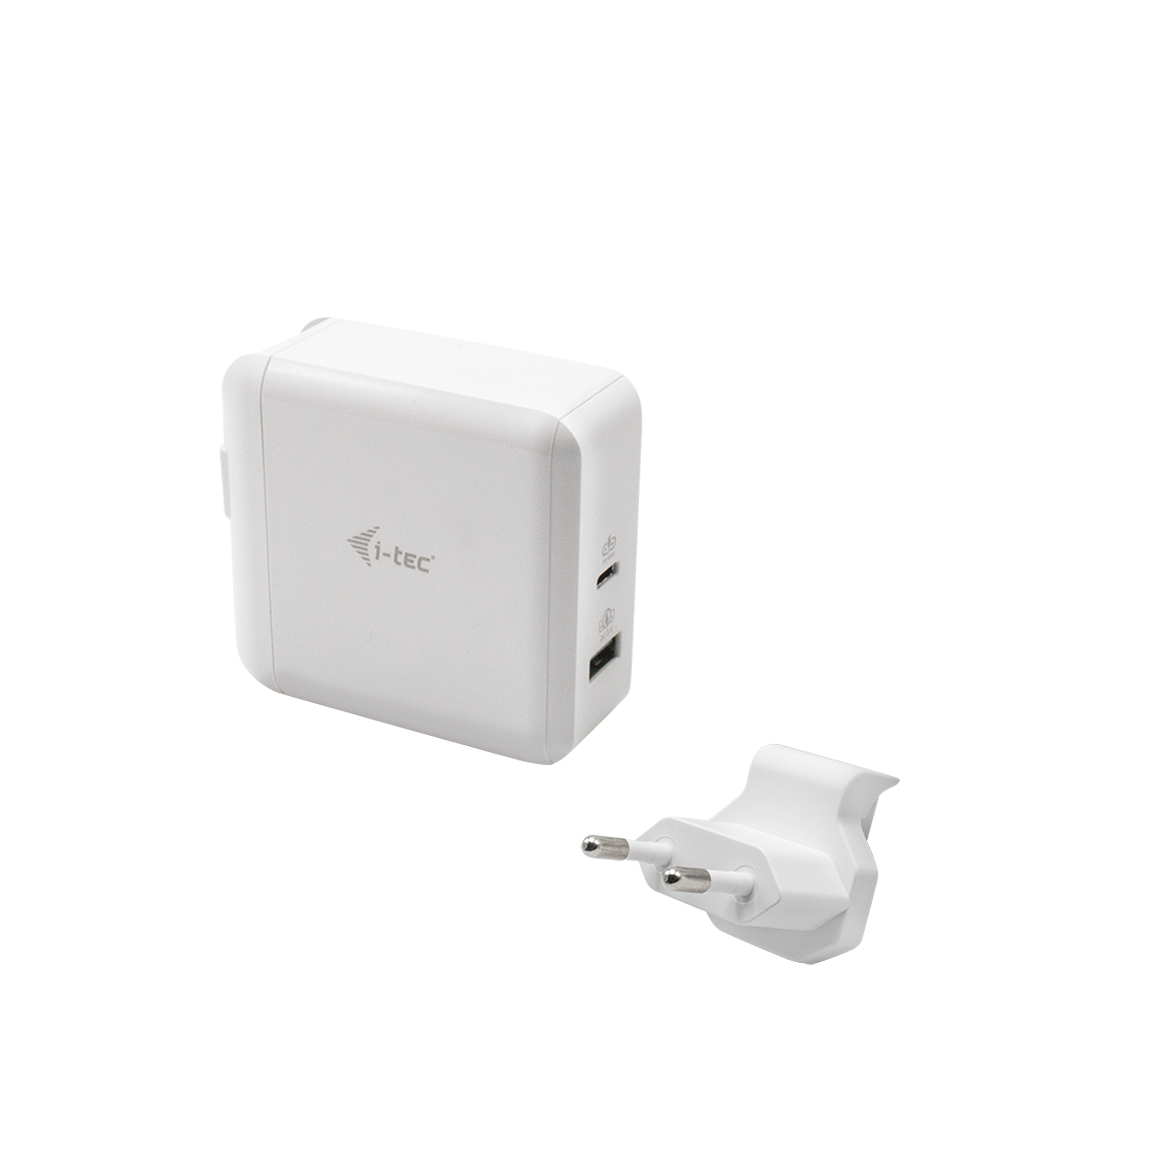 I-TEC USB-C Travel Charger 60W 1x USB-C port 60W 1x USB-A port 18W for laptops tablets smartphones HP Apple Dell MacBook etc.